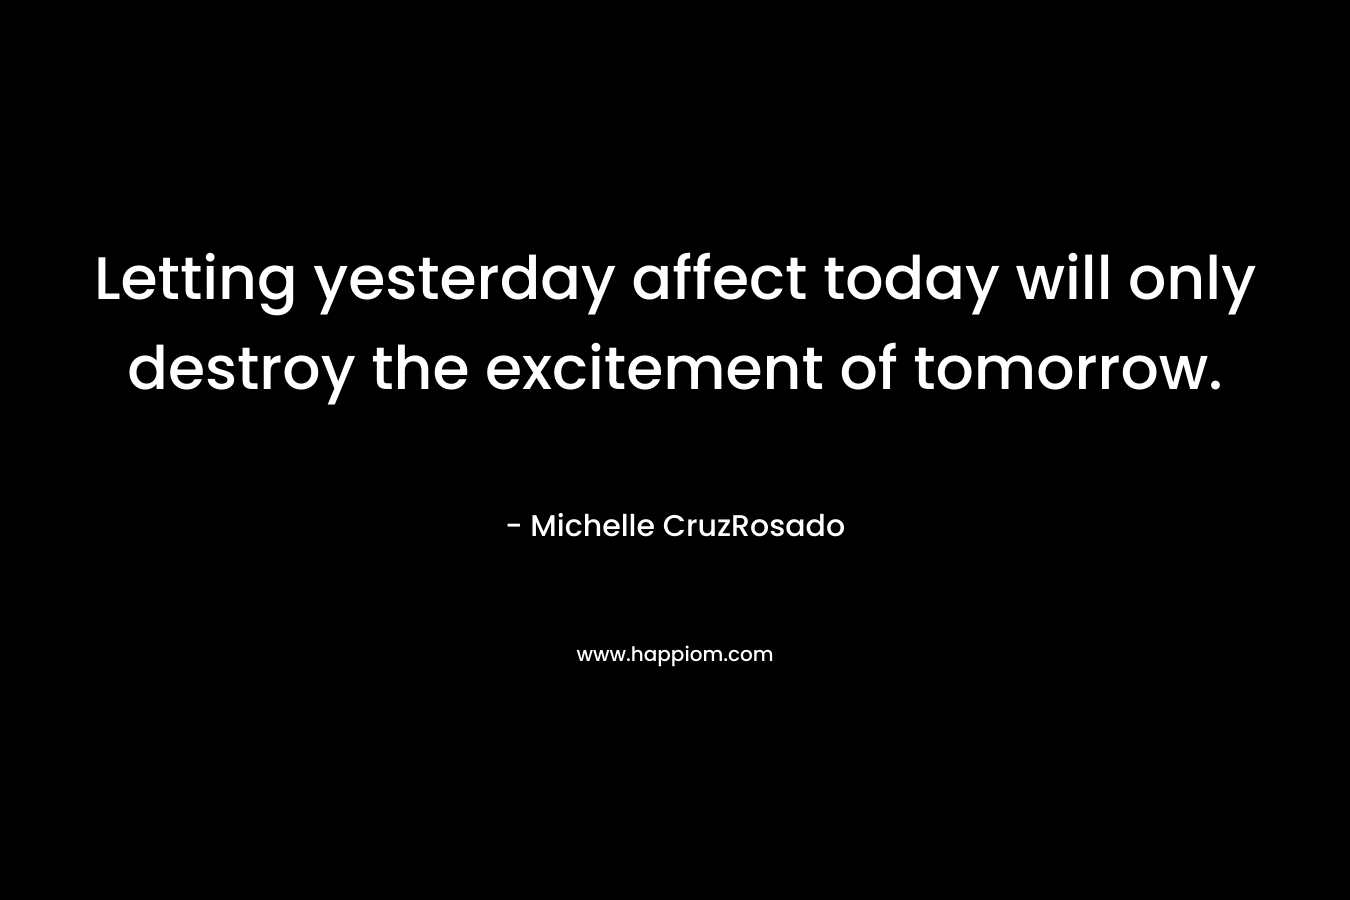 Letting yesterday affect today will only destroy the excitement of tomorrow. – Michelle CruzRosado